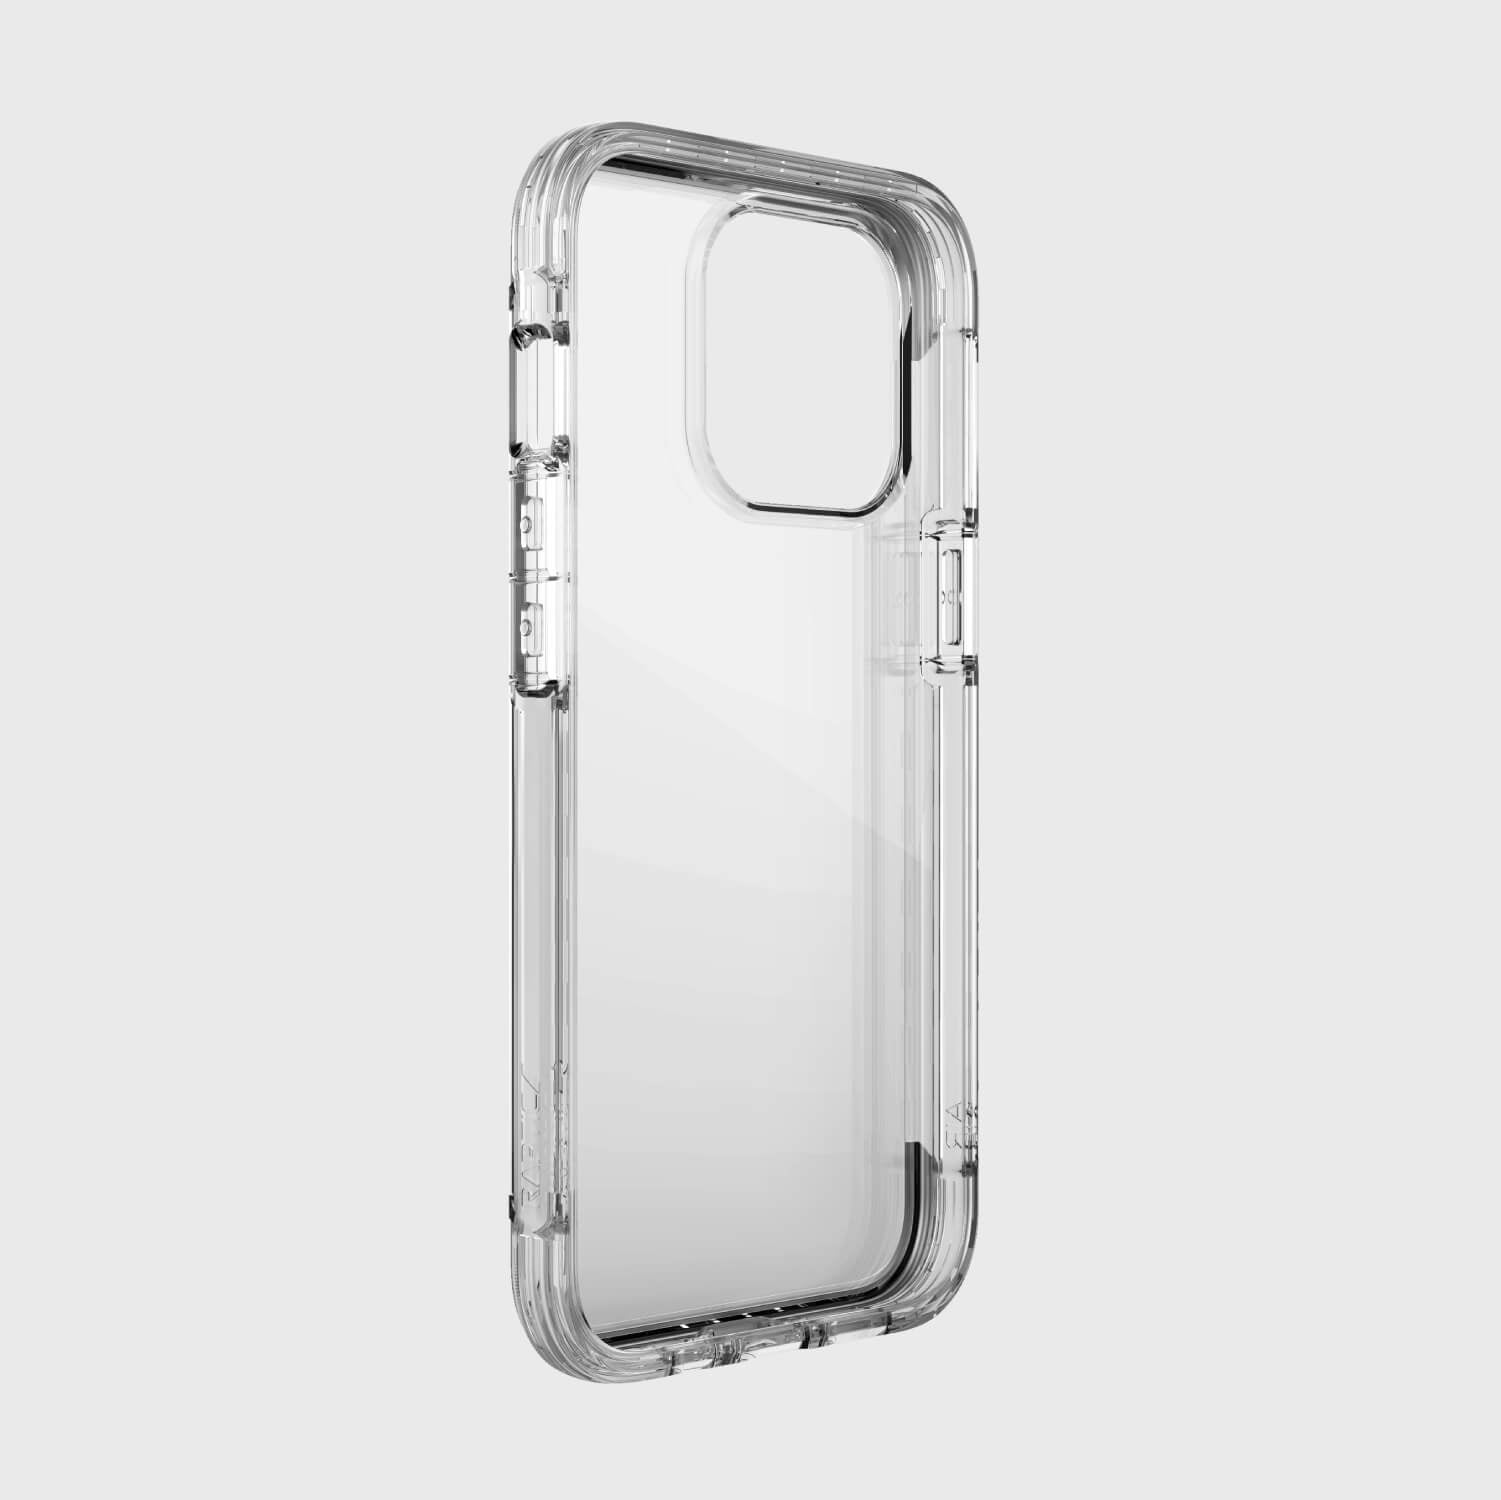 A clear Raptic Air iPhone 13 Pro Case on a white background.